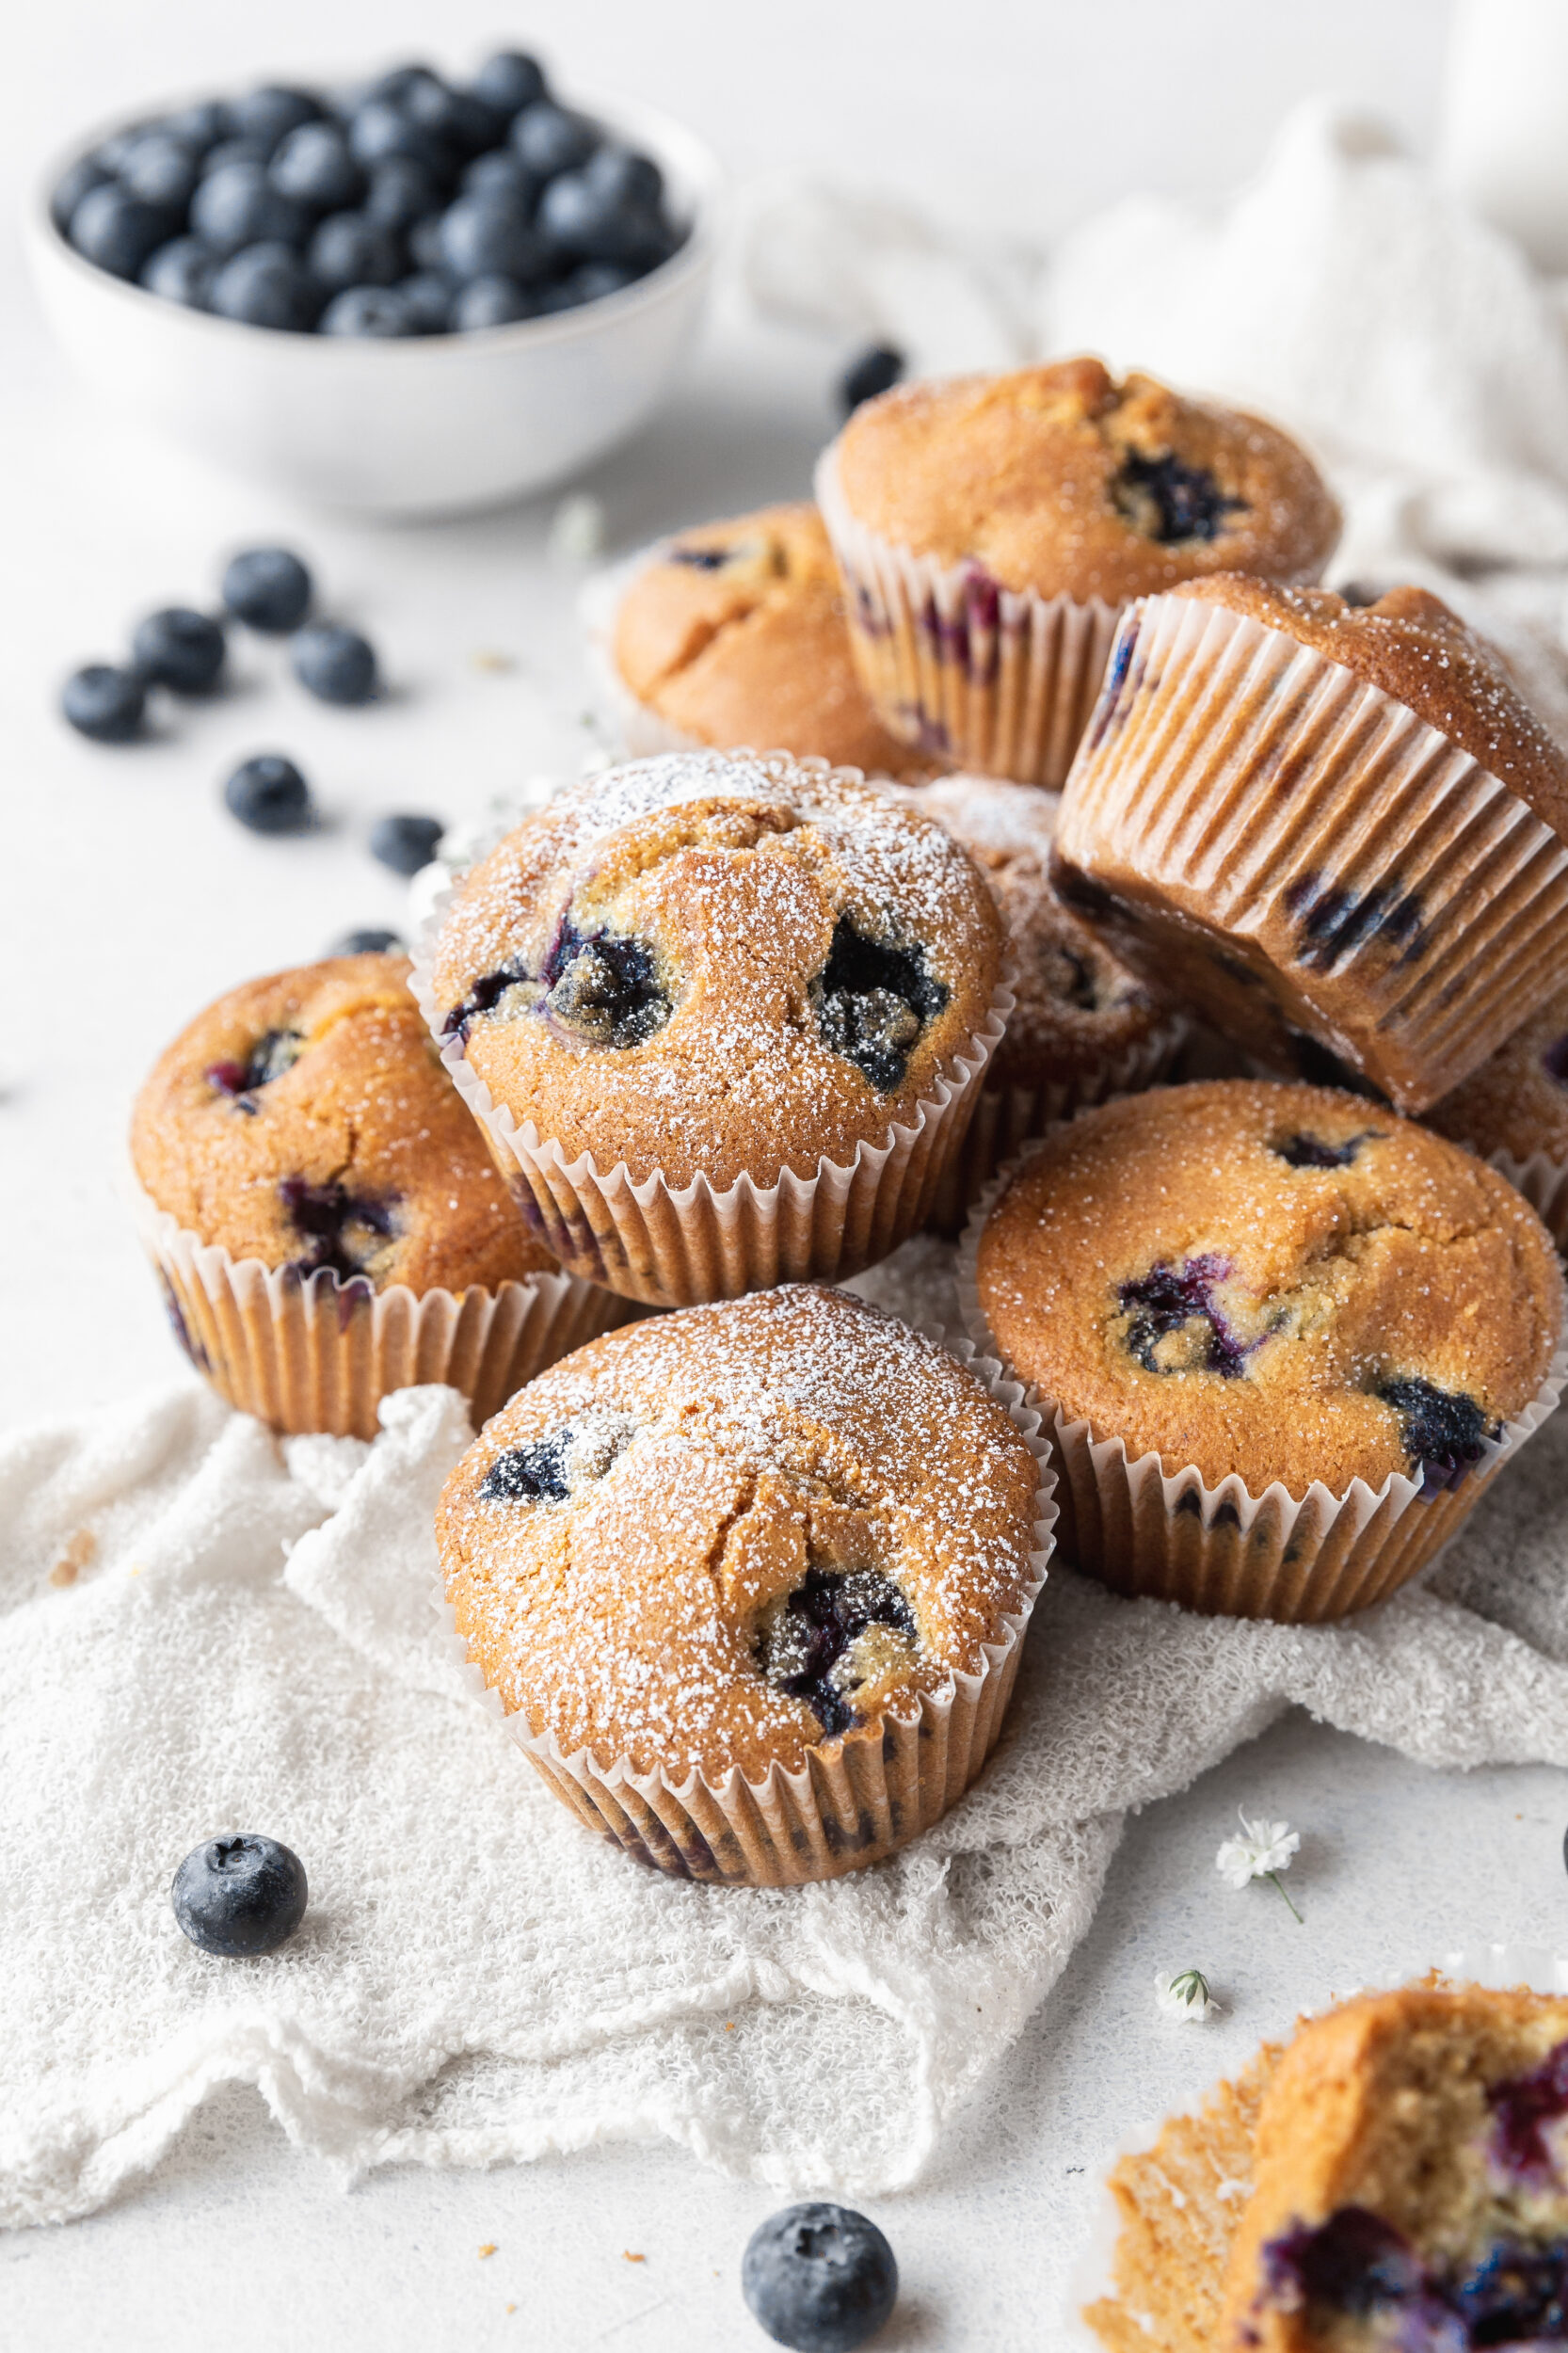 An up-close shot of dairy-free blueberry muffins piled on a cloth on the counter.